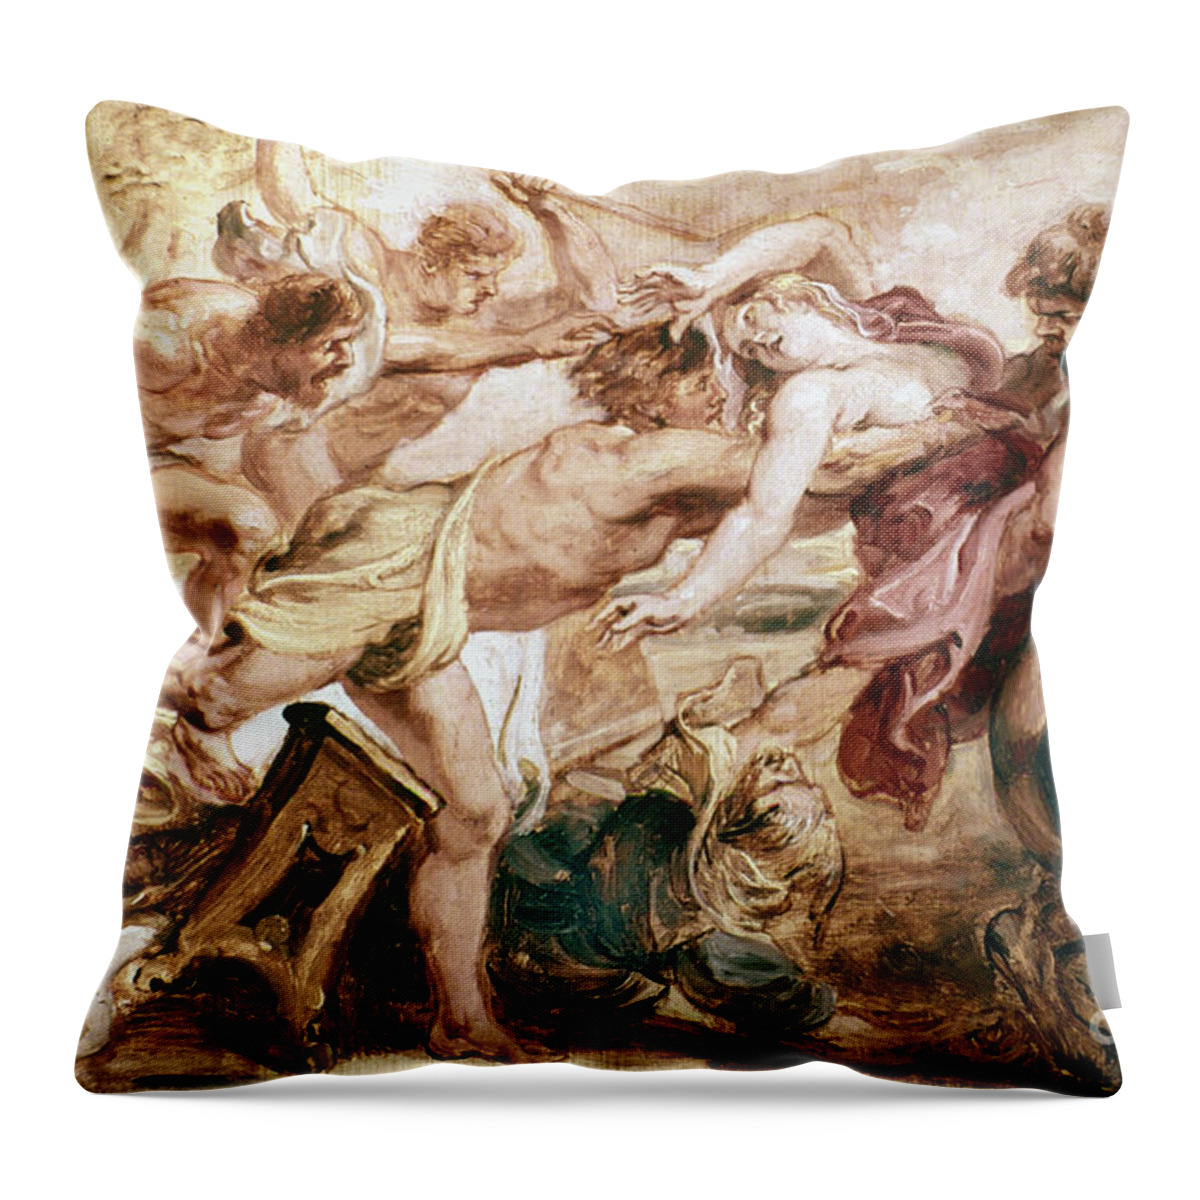 Abduction Throw Pillow featuring the painting Abduction Of Hippodamia by Granger